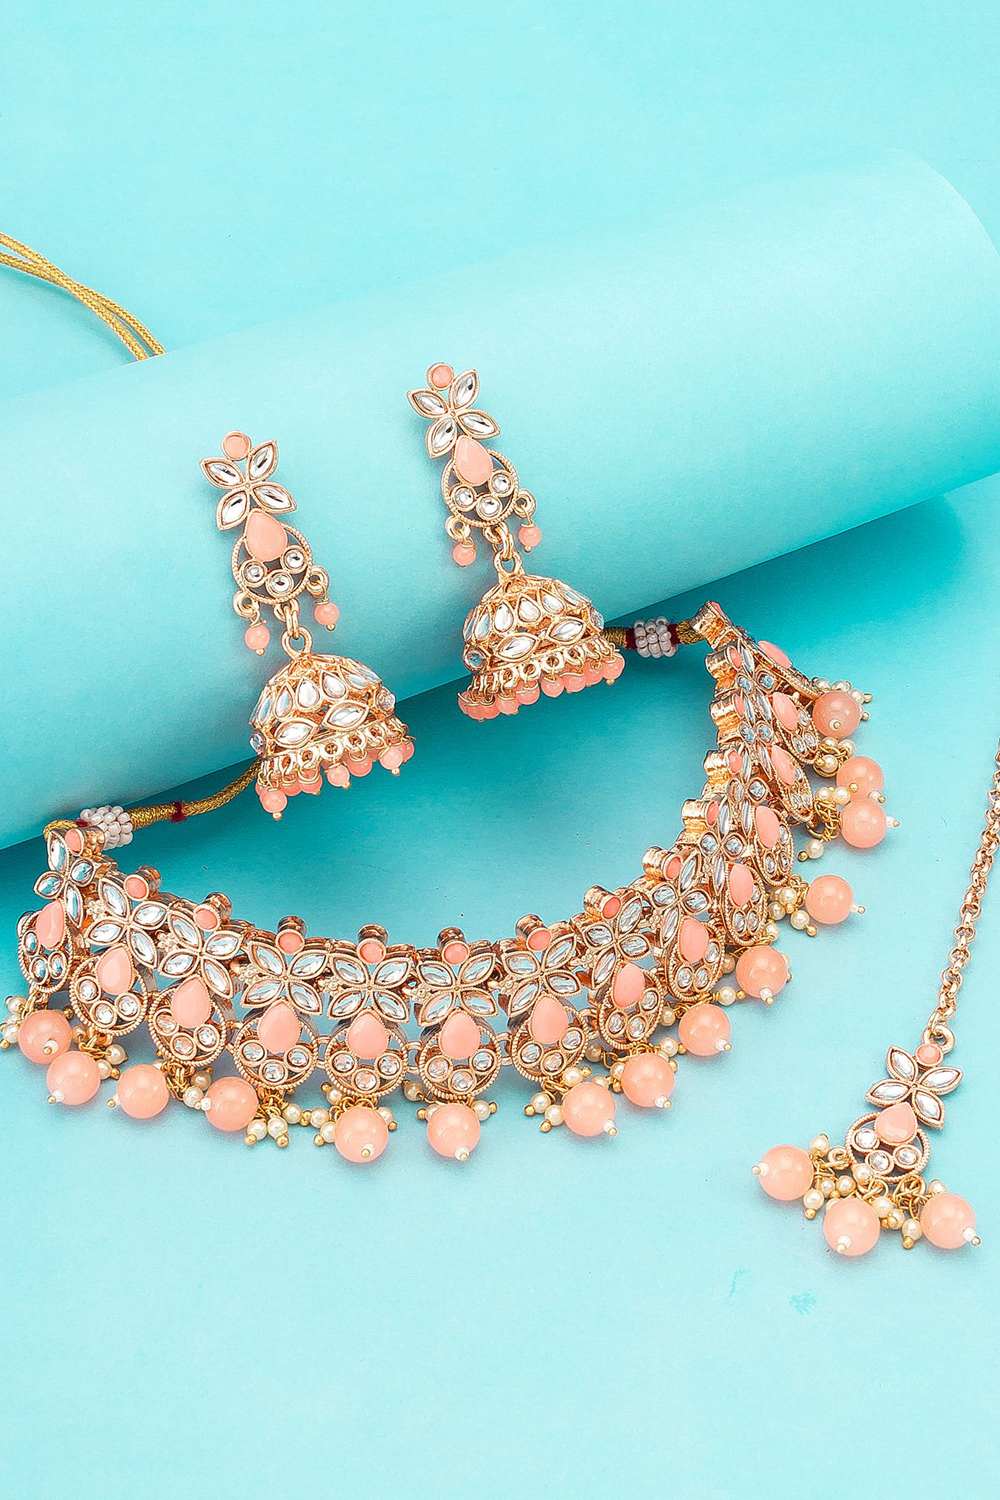 Buy Women's Alloy Necklace Set in Gold and Peach